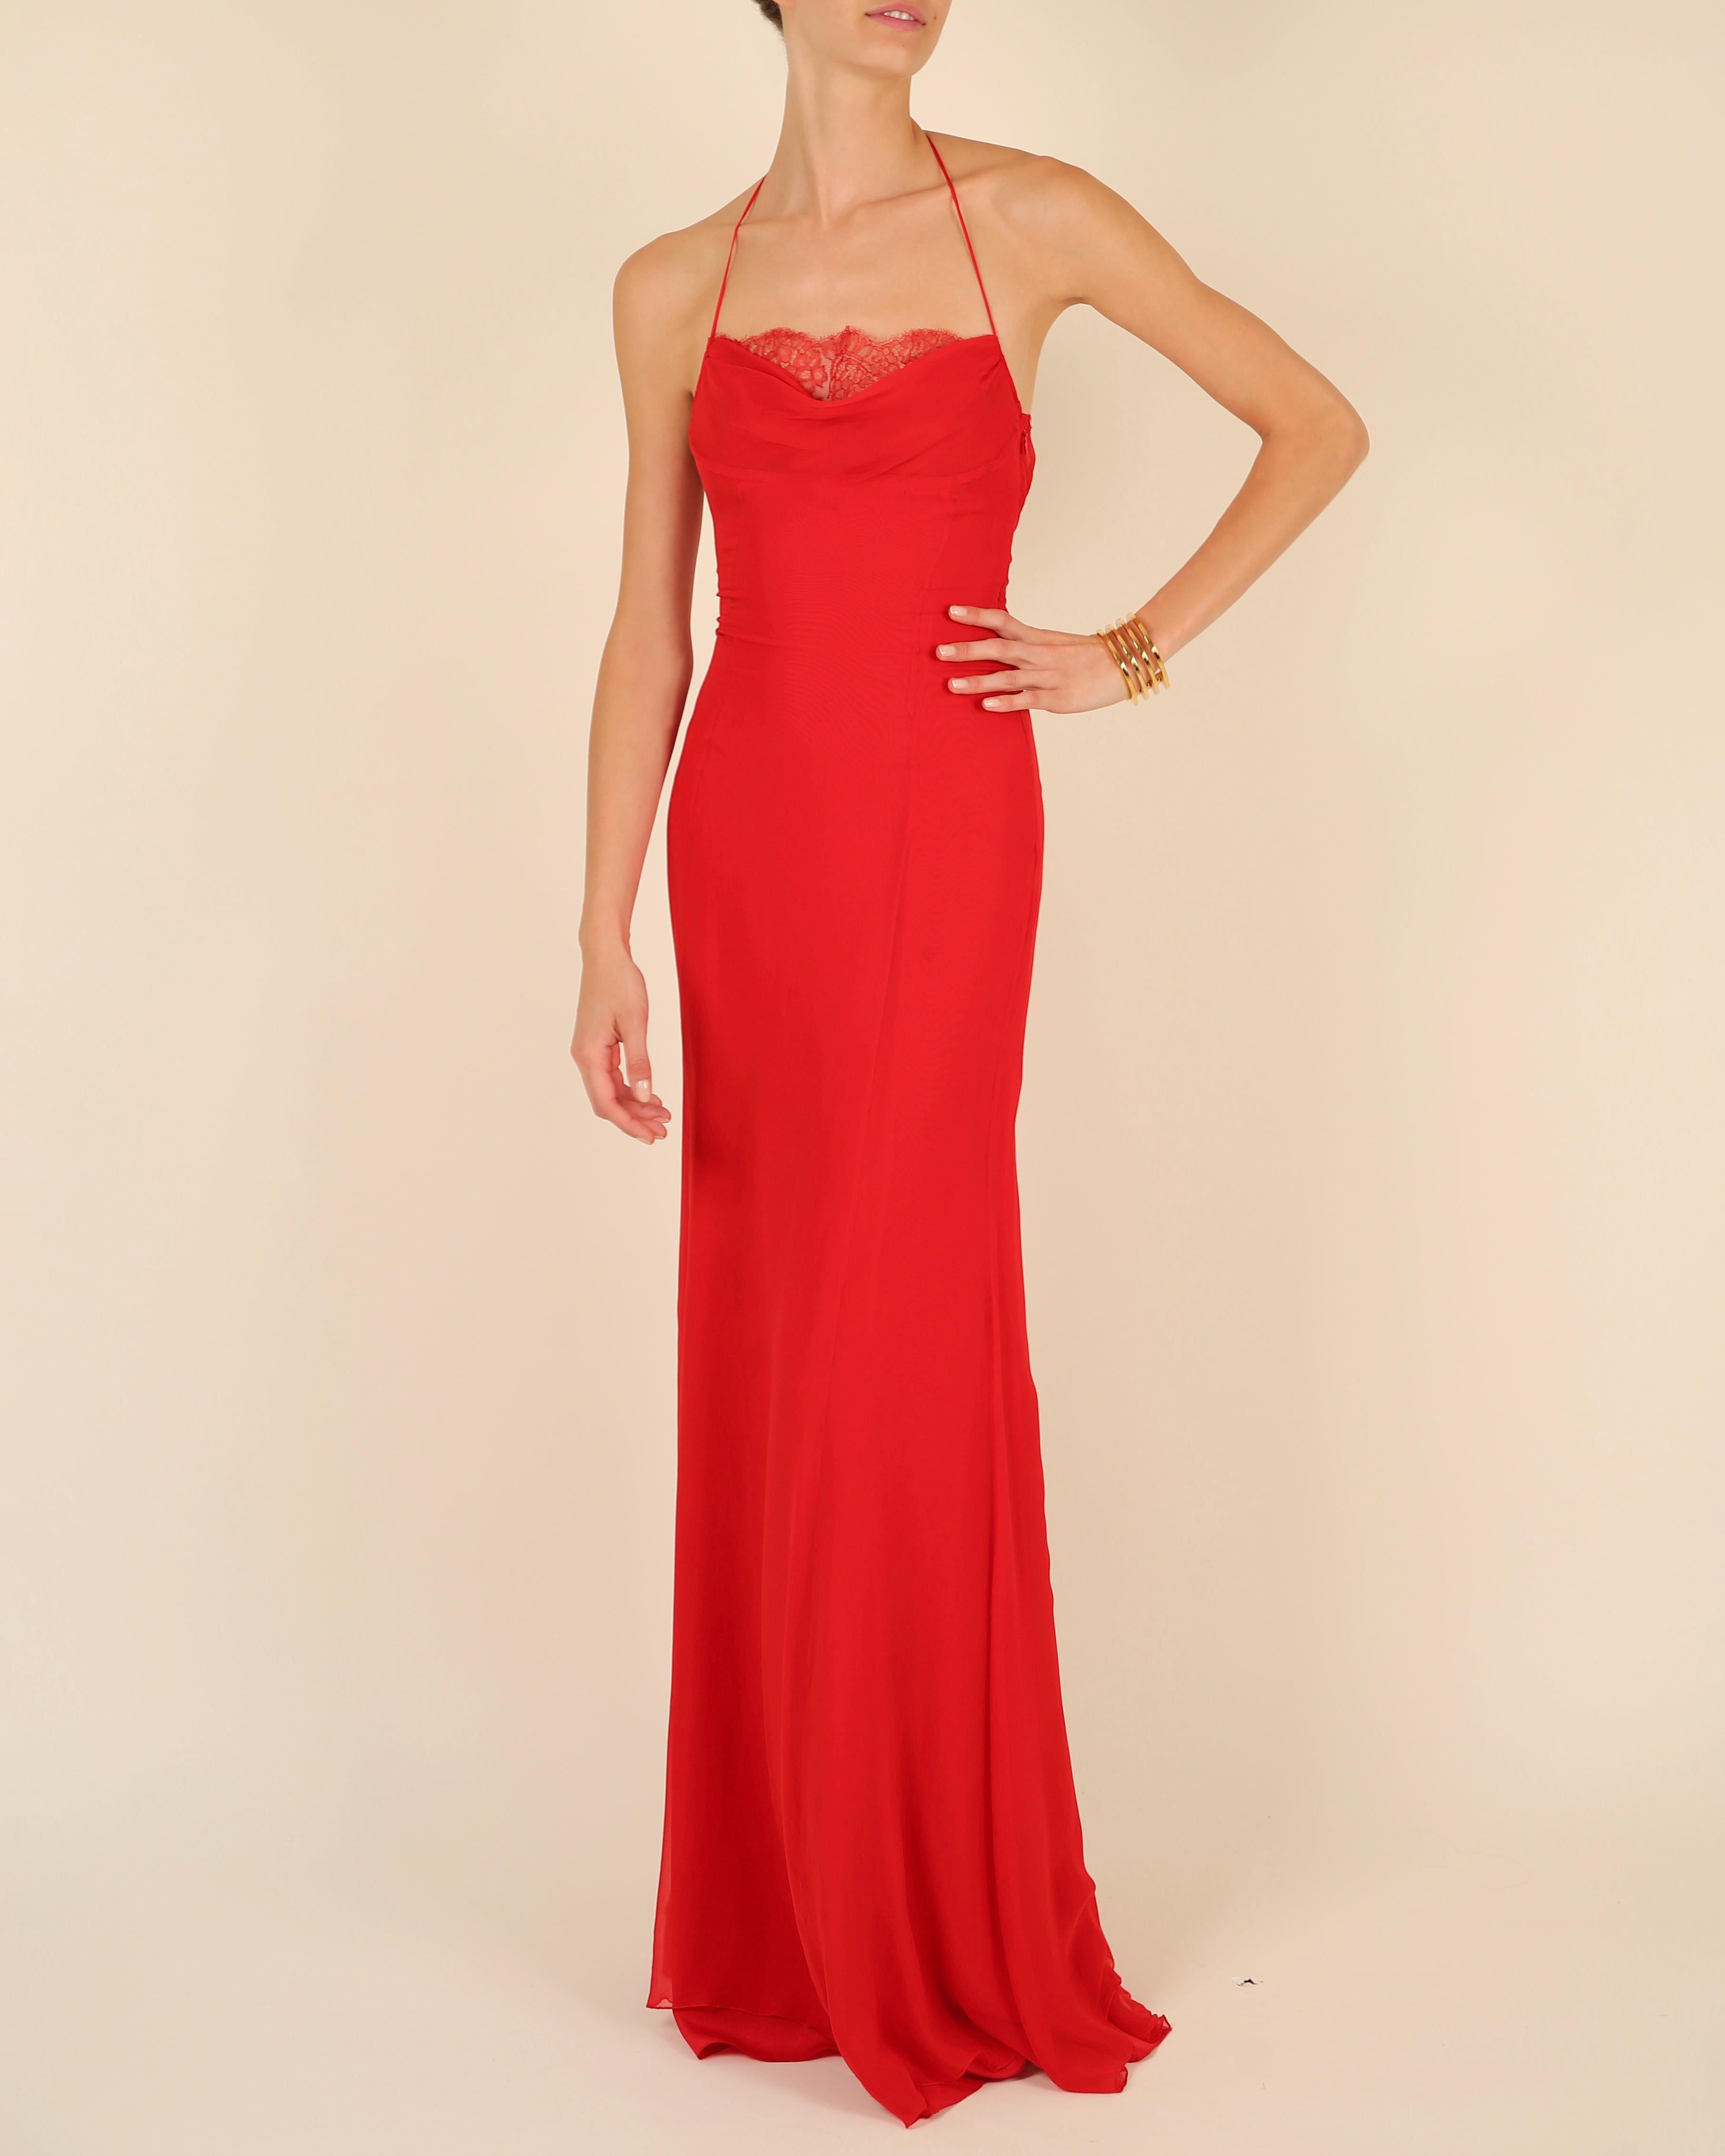 LOVE LALI Vintage

Valentino vintage silk gown circa 1990
This is an absolutely head turning gown in the most beautiful shade of Valentino red
Halter neck design that ties at the back of the neck with long spaghetti style straps
Lace peekaboo insert